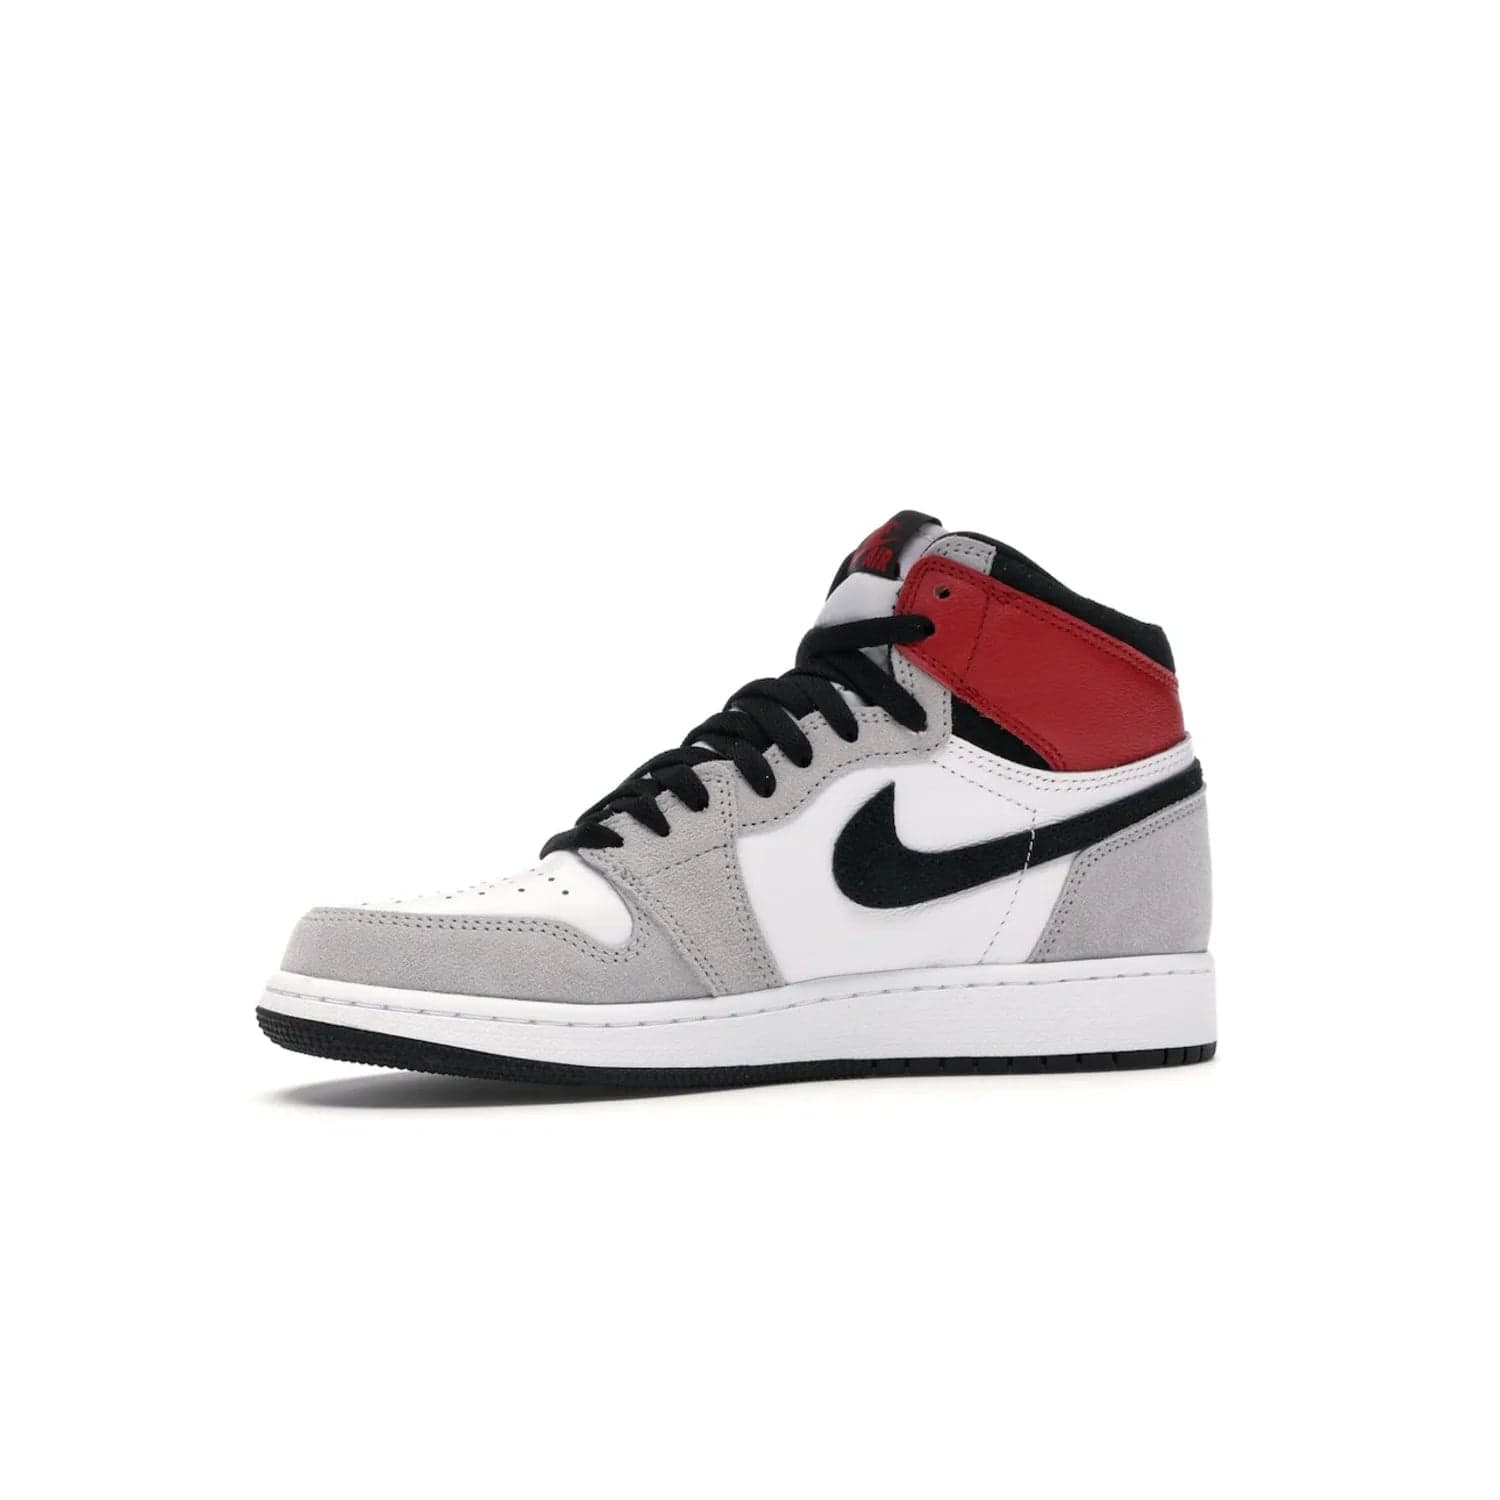 Jordan 1 Retro High Light Smoke Grey (GS) - Image 17 - Only at www.BallersClubKickz.com - Jordan 1 Retro High Light Smoke Grey (GS) features shades of grey, black, and Varsity Red with a bold silhouette. Premium white leather and suede overlays create a unique look. Released July 2020, offering style and performance. Perfect sneaker for any collector or fan.